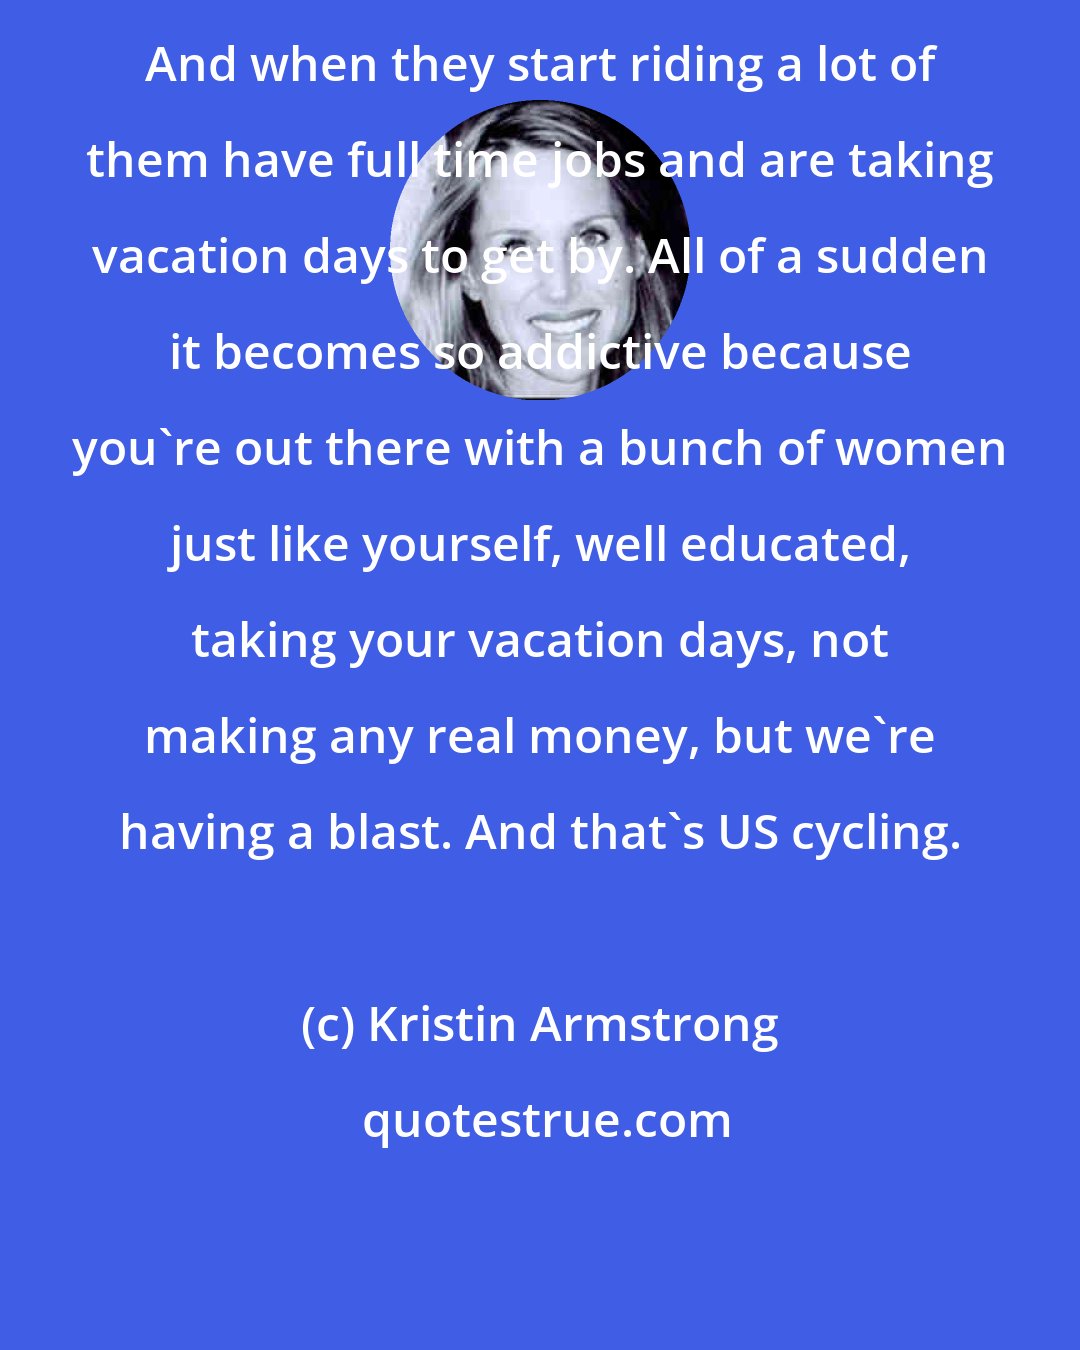 Kristin Armstrong: And when they start riding a lot of them have full time jobs and are taking vacation days to get by. All of a sudden it becomes so addictive because you're out there with a bunch of women just like yourself, well educated, taking your vacation days, not making any real money, but we're having a blast. And that's US cycling.